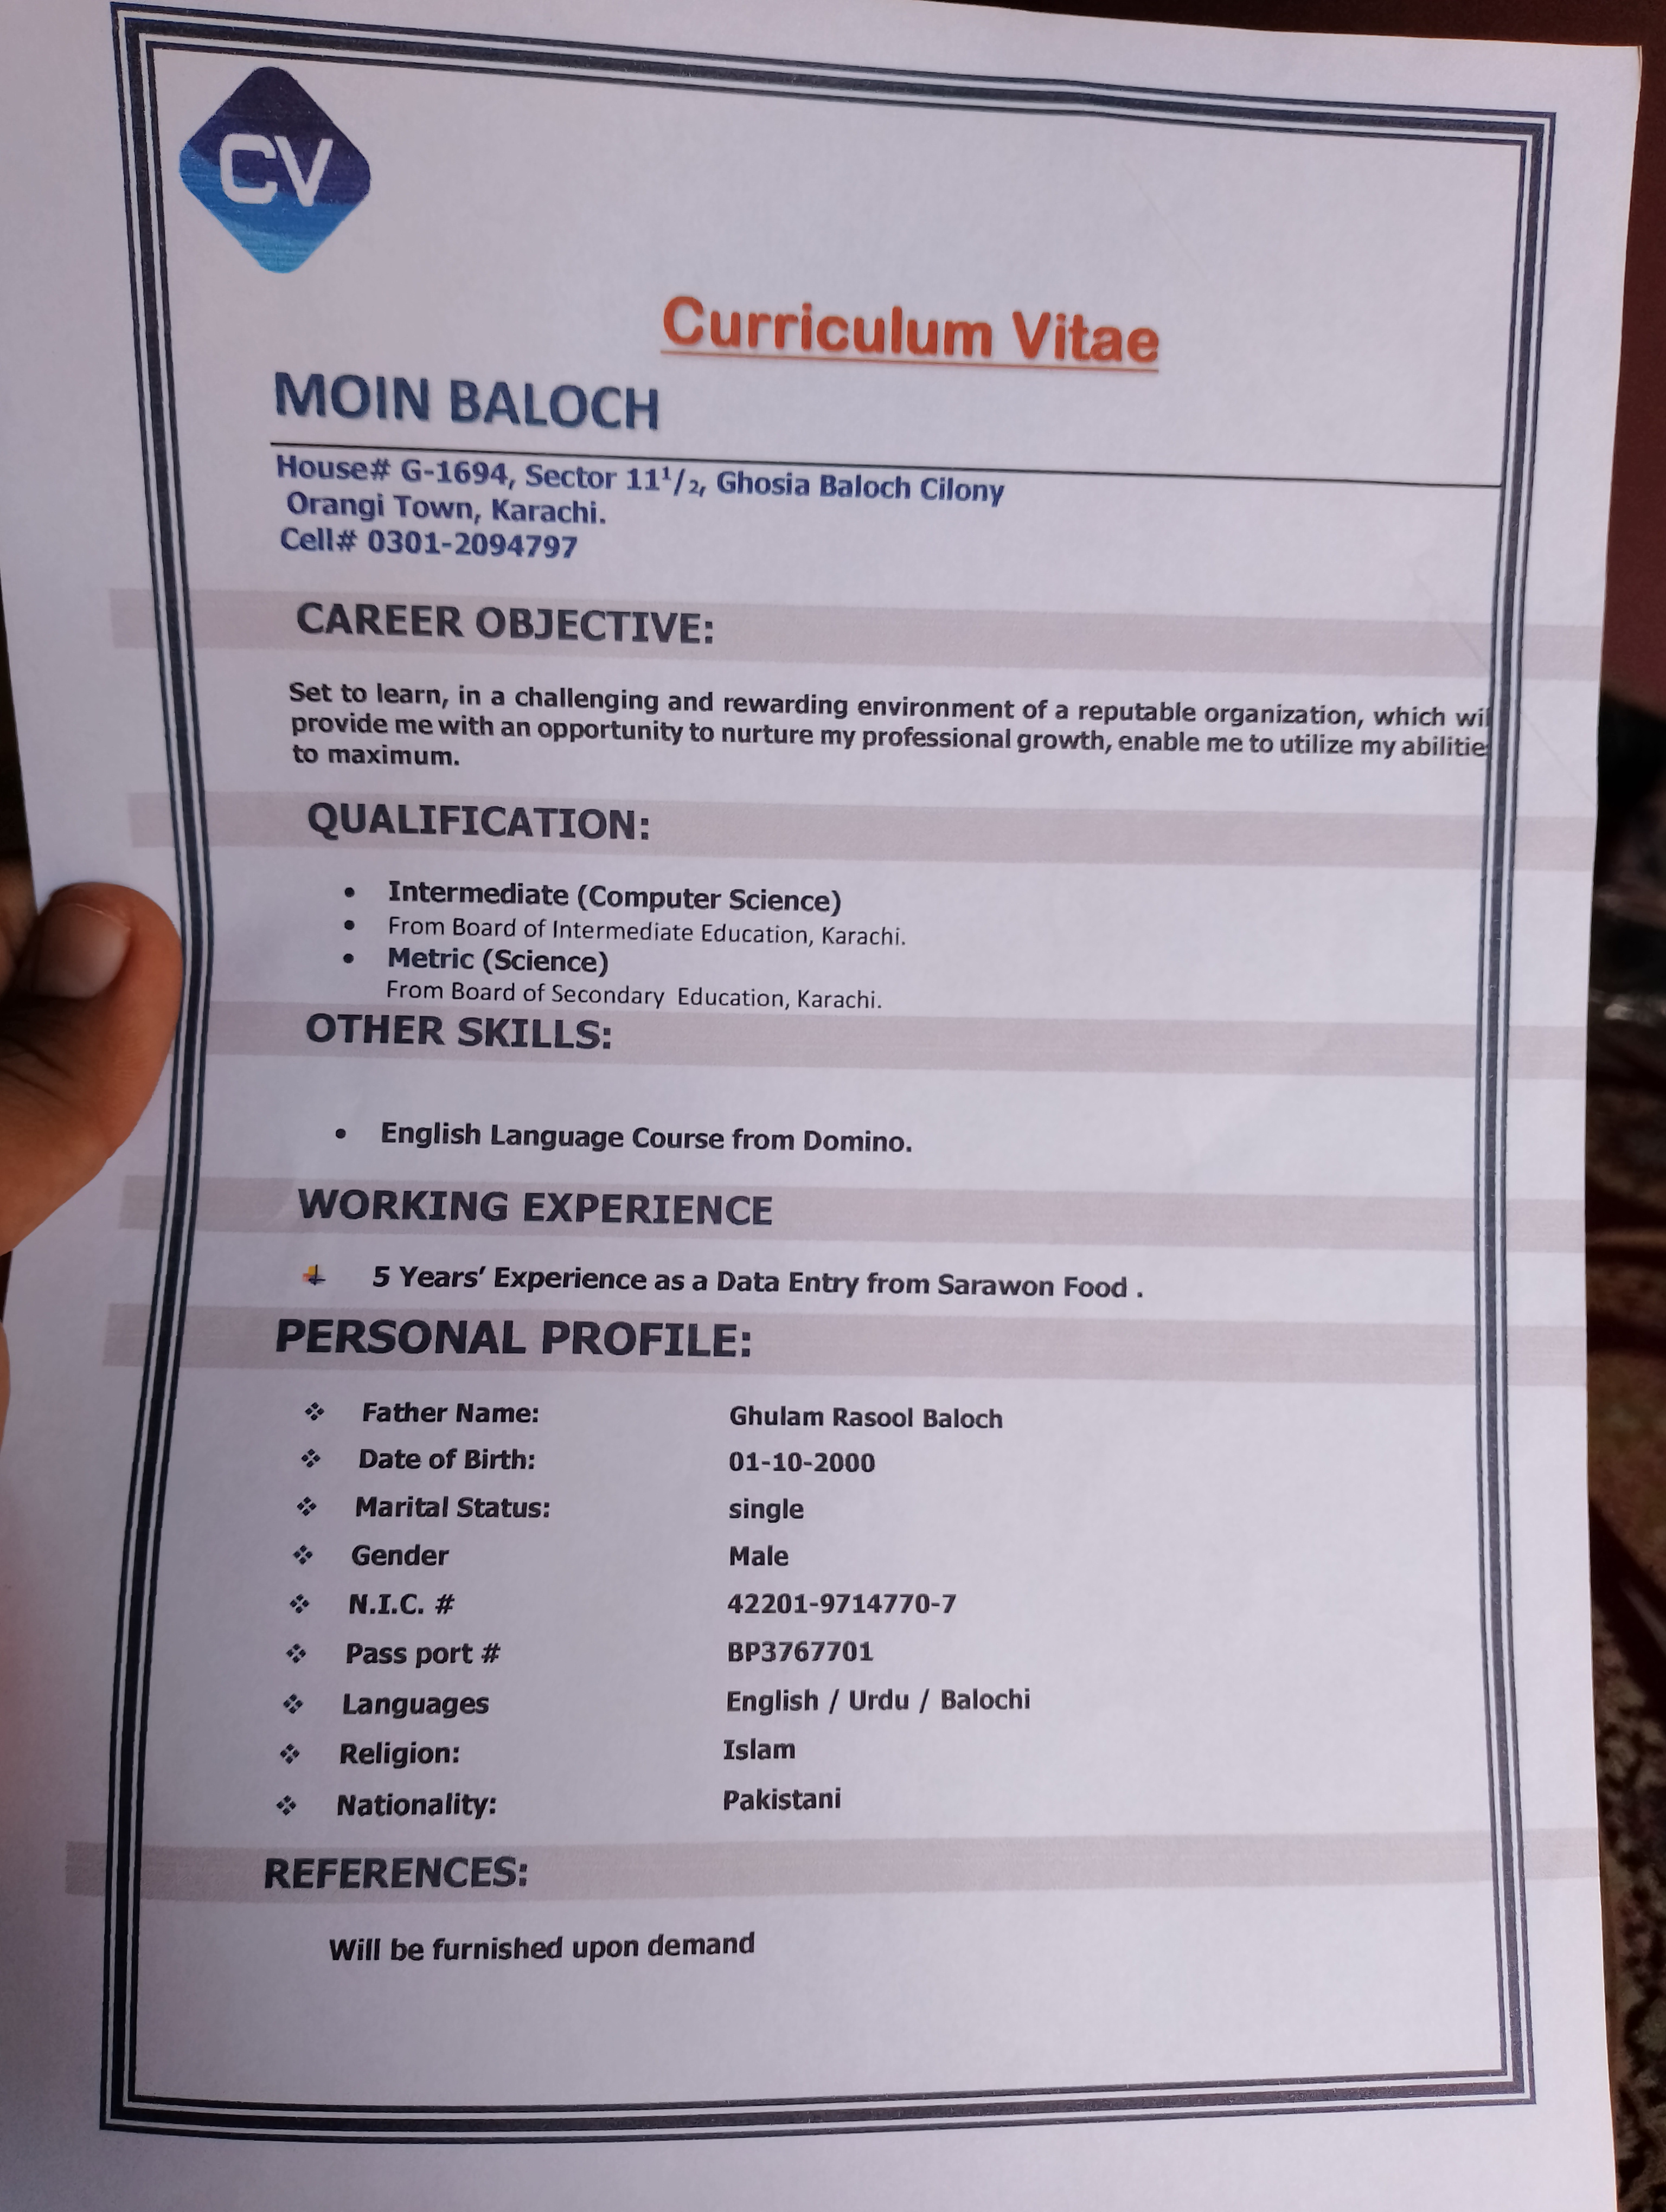 Curriculum Vitae
MOIN BALOCH

House# G-1694, Sector 11'/,, Ghosia Baloch Cilony
Orangi Town, Karachi.
Cell# 0301-2094797

CAREER OBJECTIVE:

    
 

Set to learn, in a challenging and rewarding environment of a reputable organization, which wi
provide me with an opportunity to nurture my professional growth, enable me to utilize my abilitie:
to maximum.

QUALIFICATION:

» Intermediate (Computer Science)
® From Board of Intermediate Education, Karachi.
* Metric (Science)

From Board of Secondary Education, Karachi.

OTHER SKILLS:

  
  
    
  
  
  
  
  
 

» English Language Course from Domino.

WORKING EXPERIENCE
4 5 Years’ Experience as a Data Entry from Sarawon Food .

PERSONAL PROFILE:

  

 
   
  
  
  
   
  
    
  

¥
+

&lt; Father Name: Ghulam Rasool Baloch

&lt; Date of Birth: 01-10-2000

+ Marital Status: single

+ Gender Male

% NIC # 42201-9714770-7

s Pass port # BP3767701

% Languages English / Urdu / Balochi
&lt; Religion: Islam
% Nationality: Pakistani

~ REFERENCES:

Will be furnished upon demand